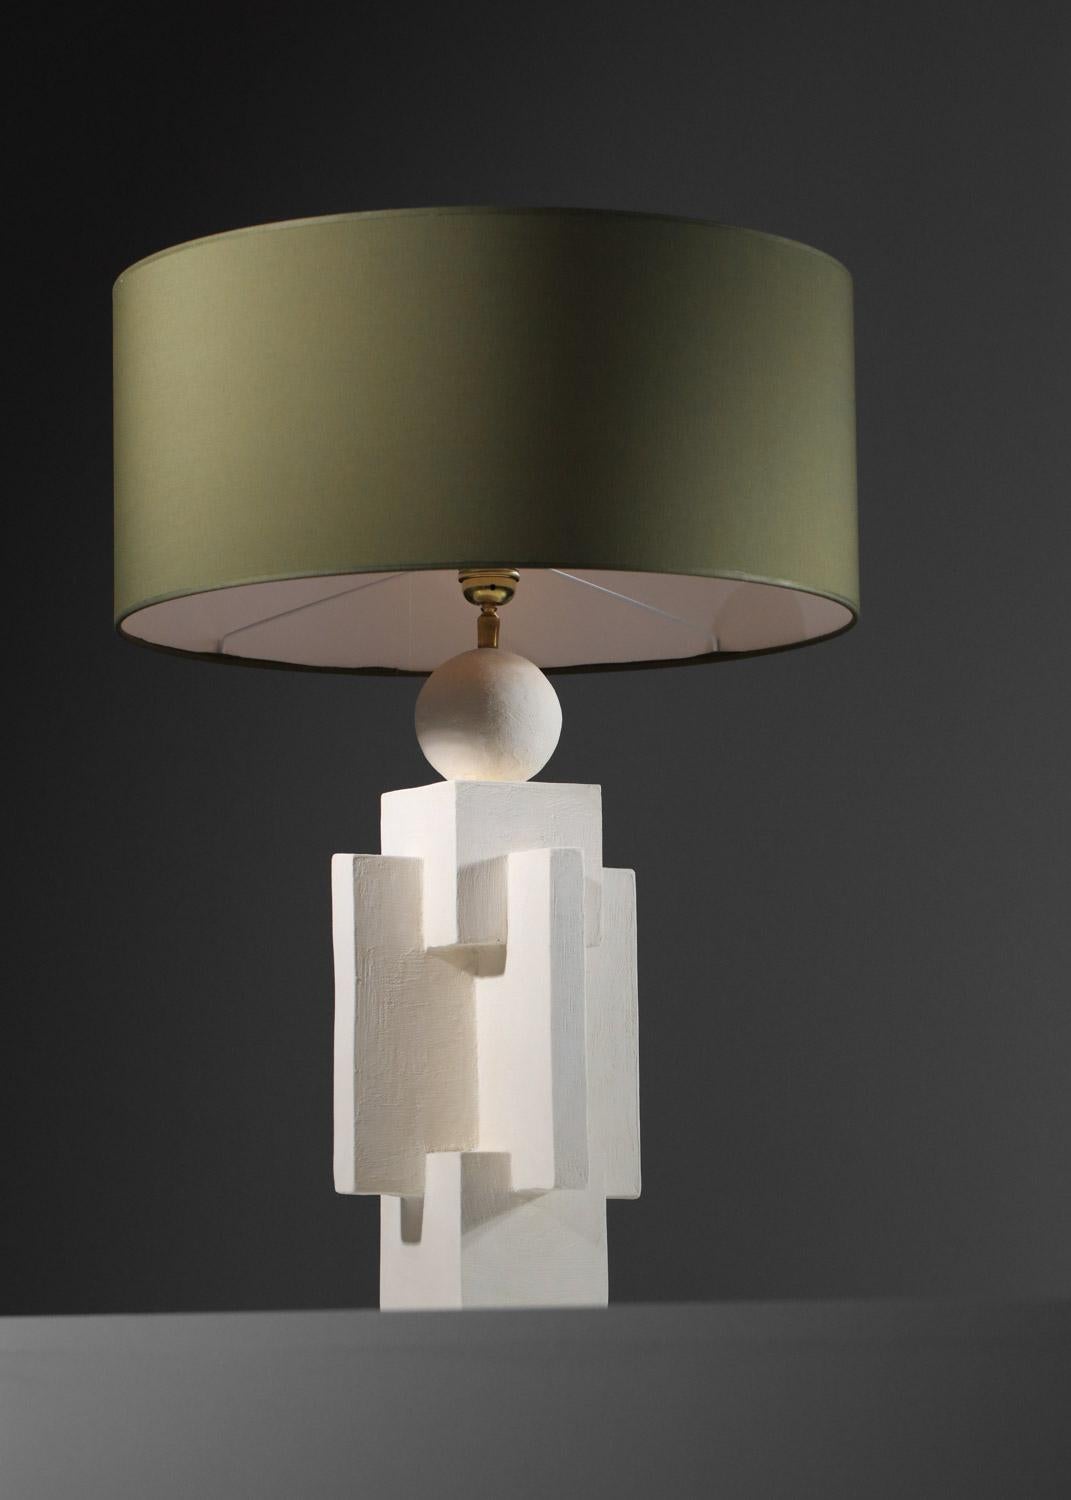 contemporary geometrical plaster lamp modernist style For Sale 1